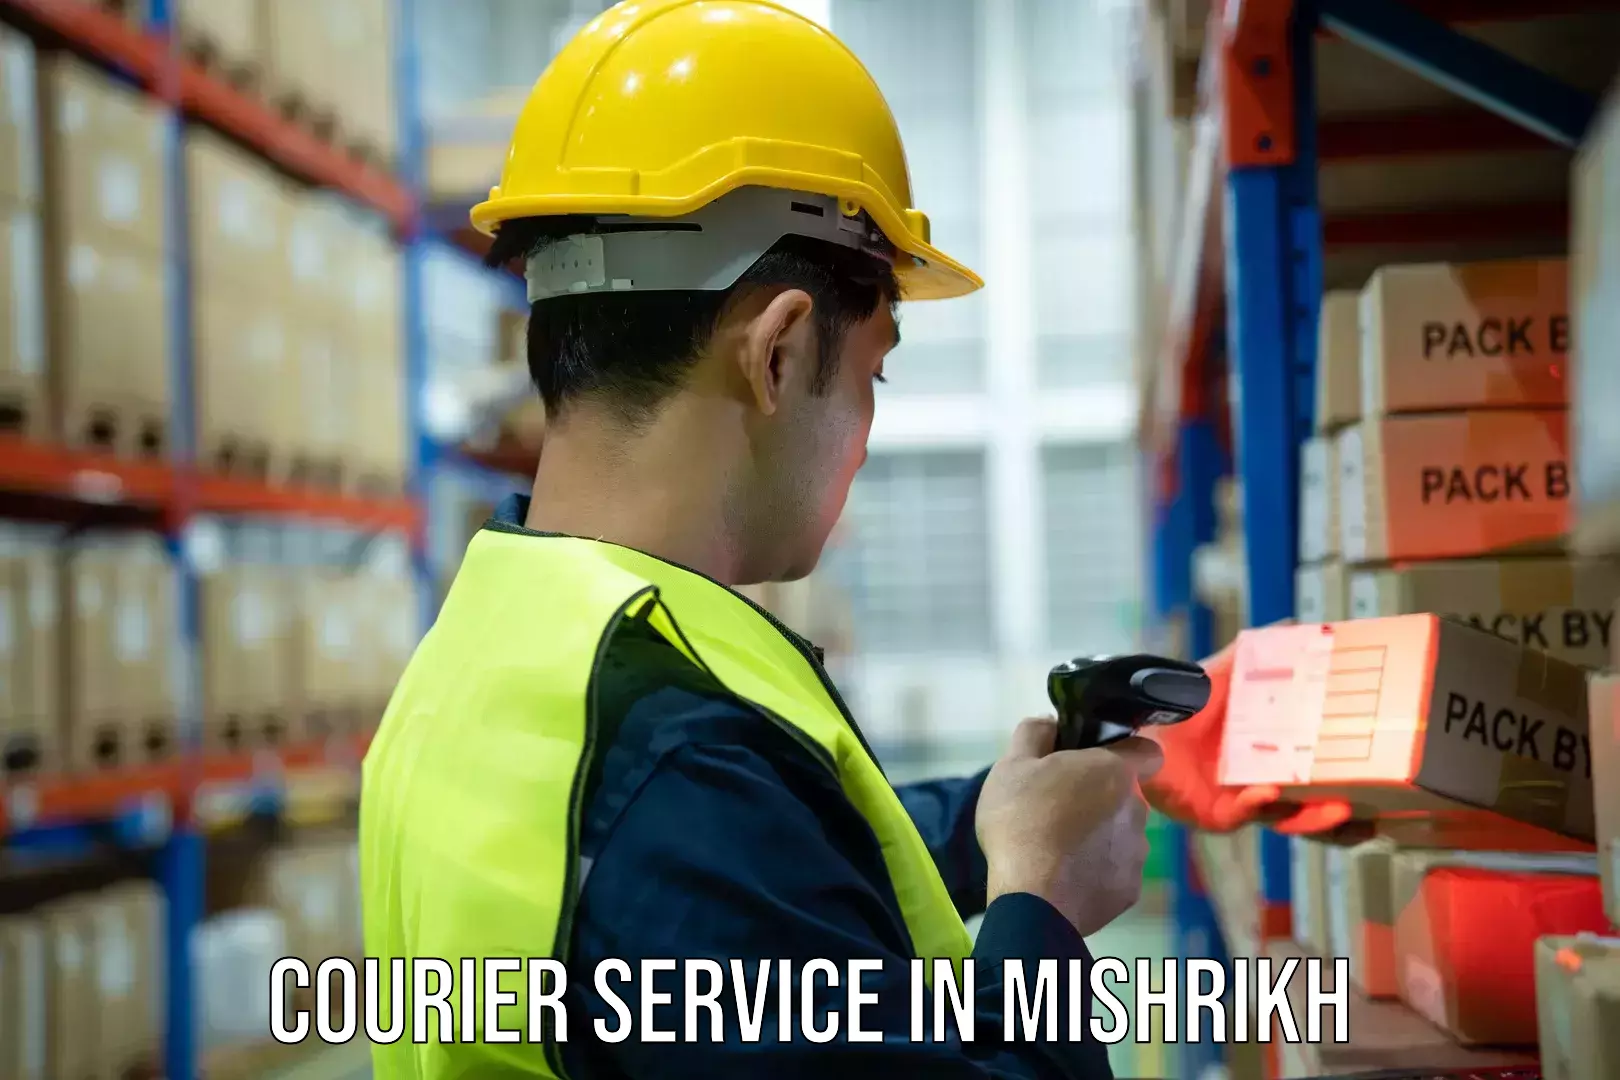 Fast delivery service in Mishrikh